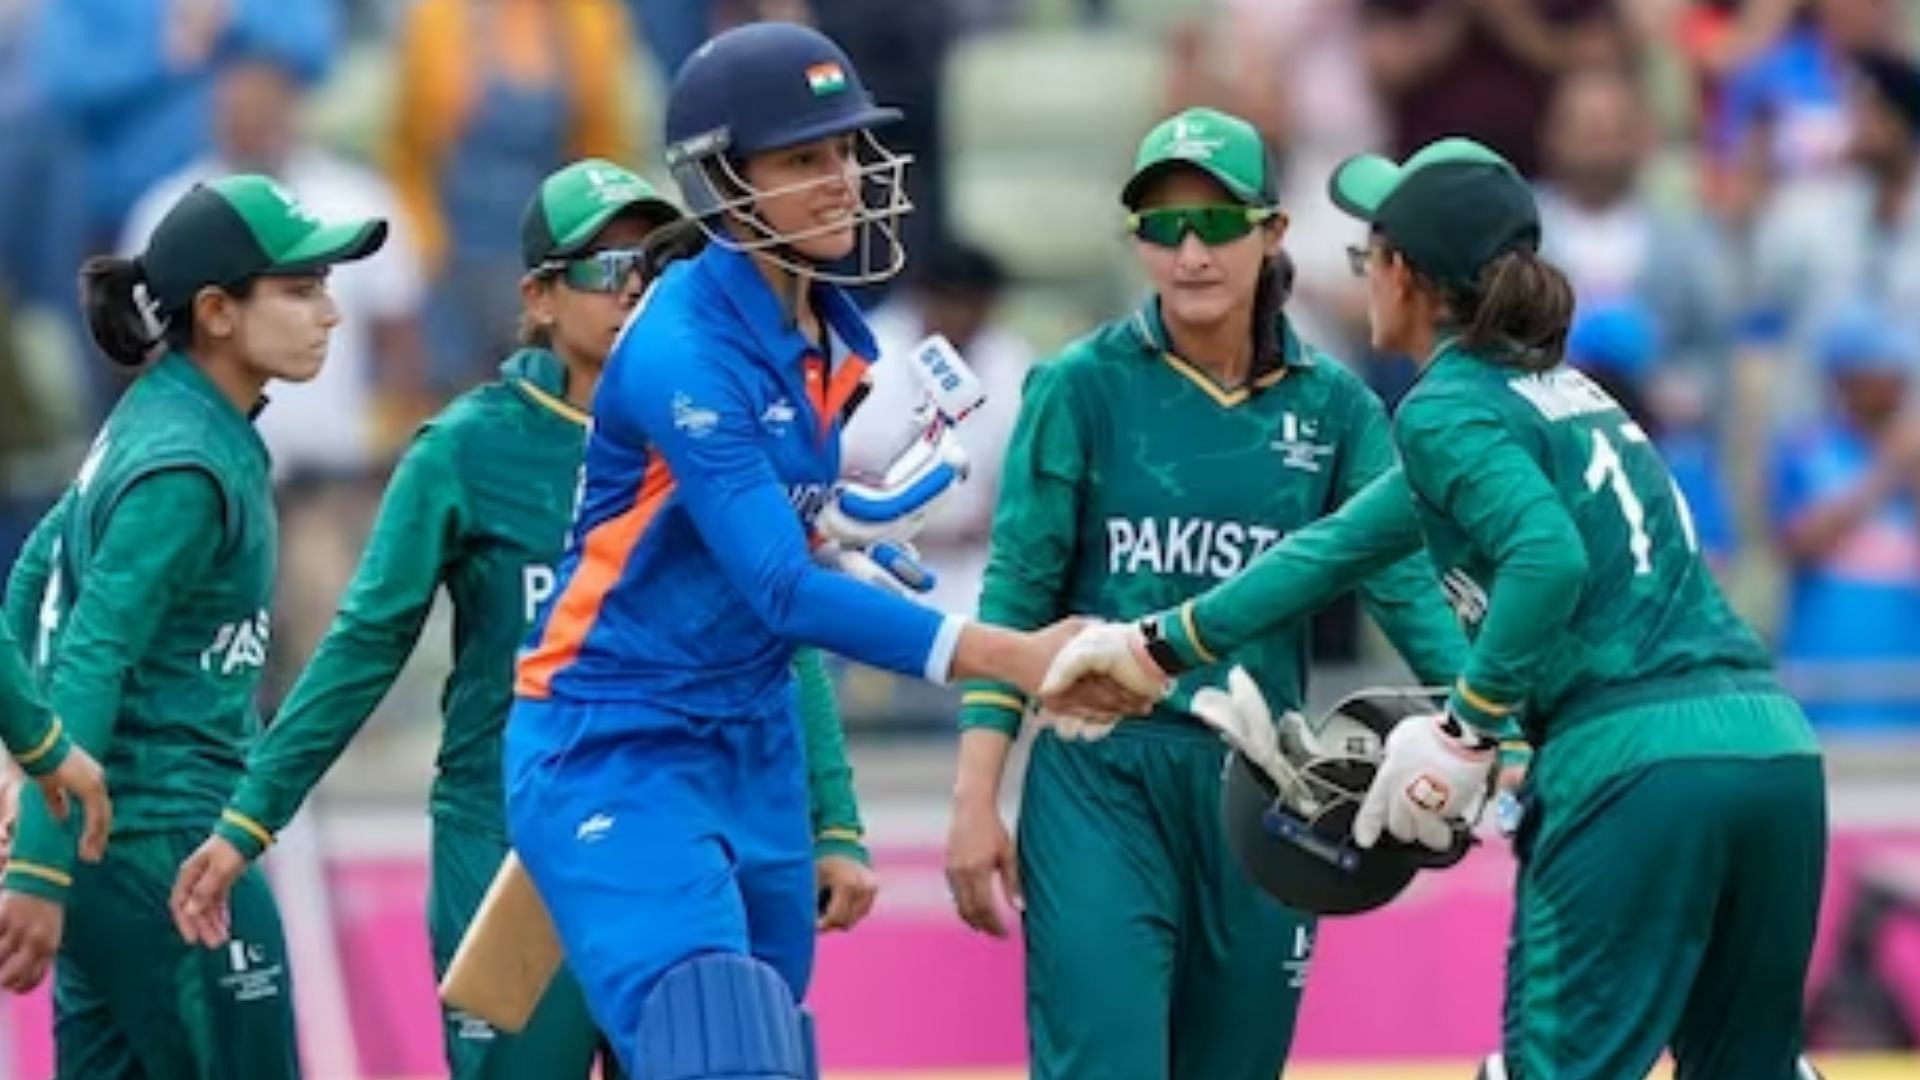 India had comfortably beaten Pakistan by 8 wickets in the Commonwealth Games 2022. (P.C.:Twitter)